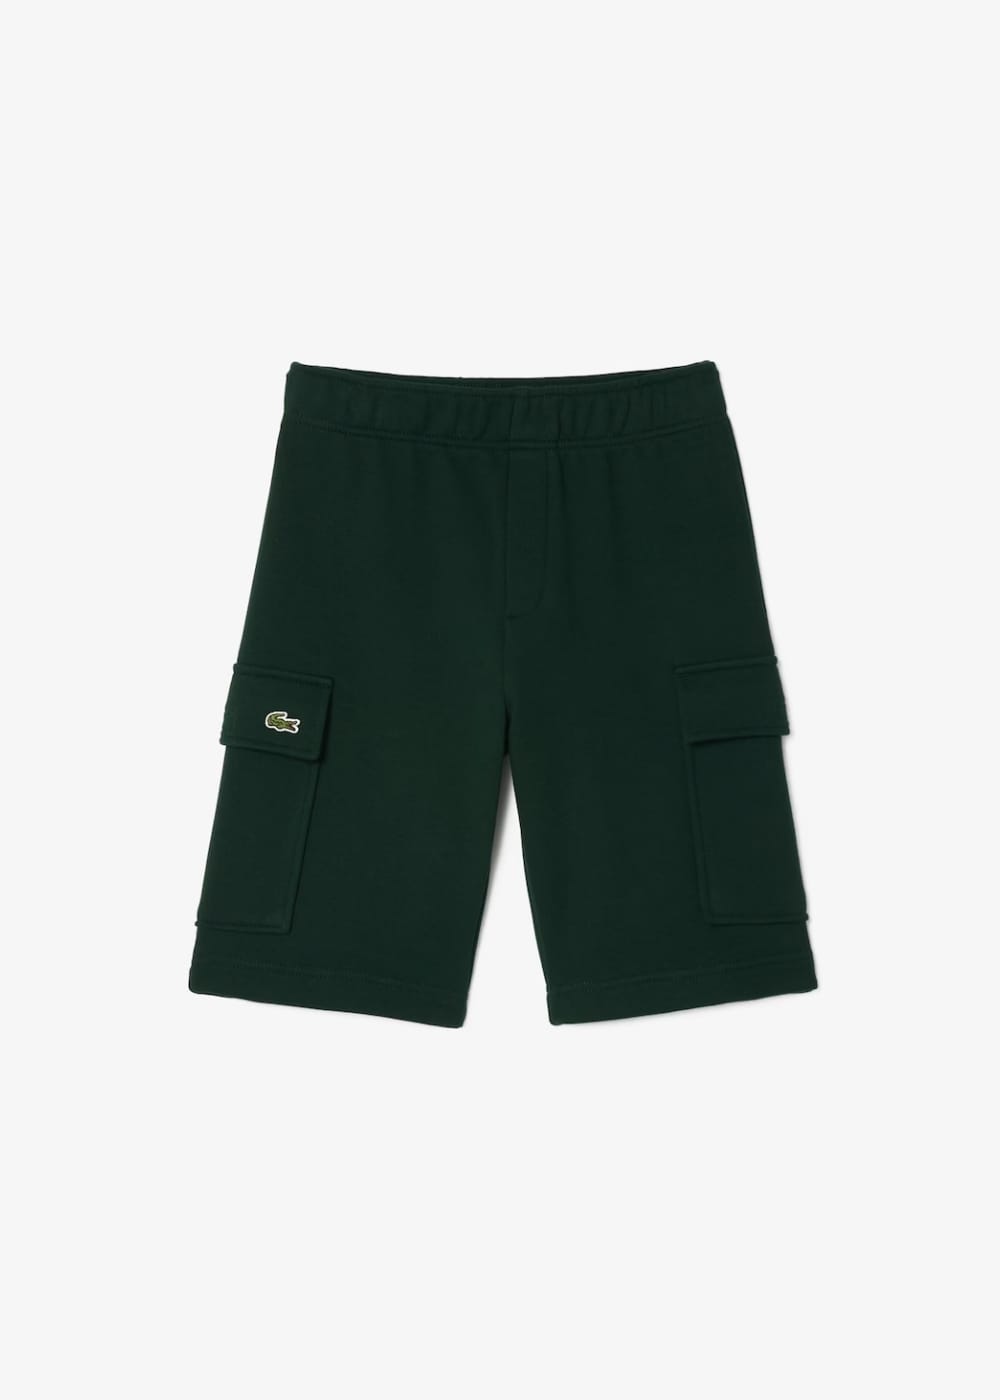 Featured image for “Lacoste Shorts Cargo”